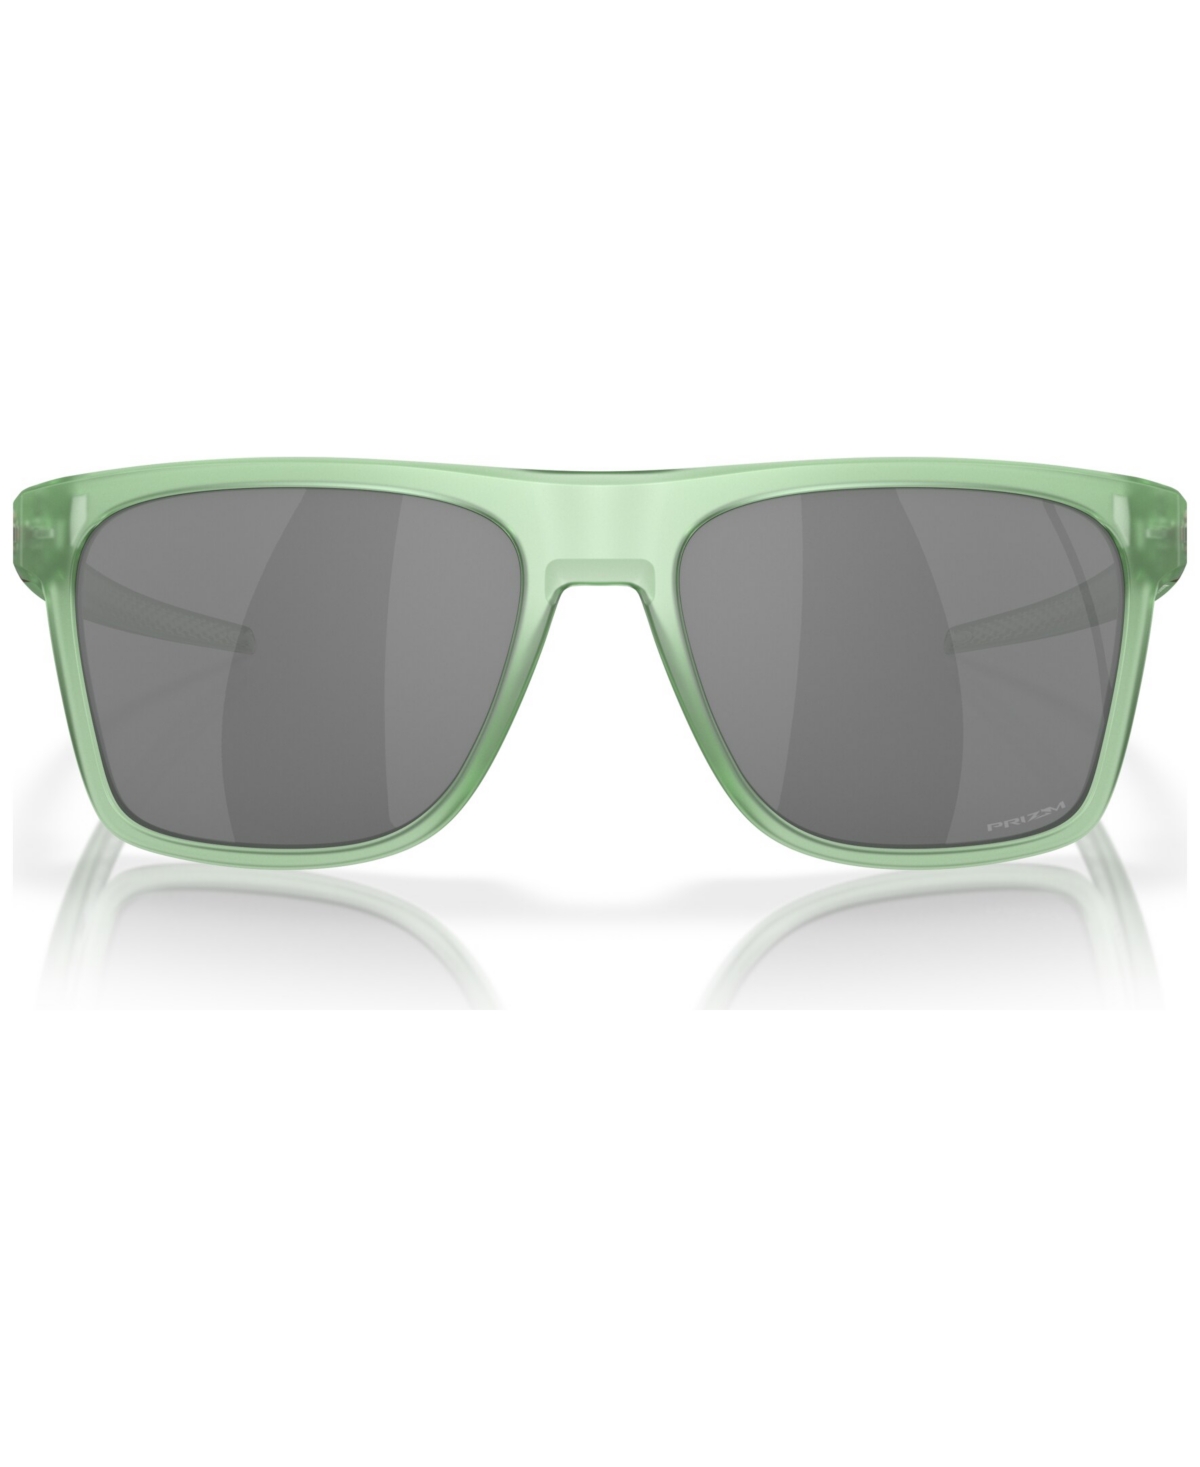 Shop Oakley Men's Leffingwell Re-discover Collection Sunglasses, Mirror Oo9100 In Matte Jade